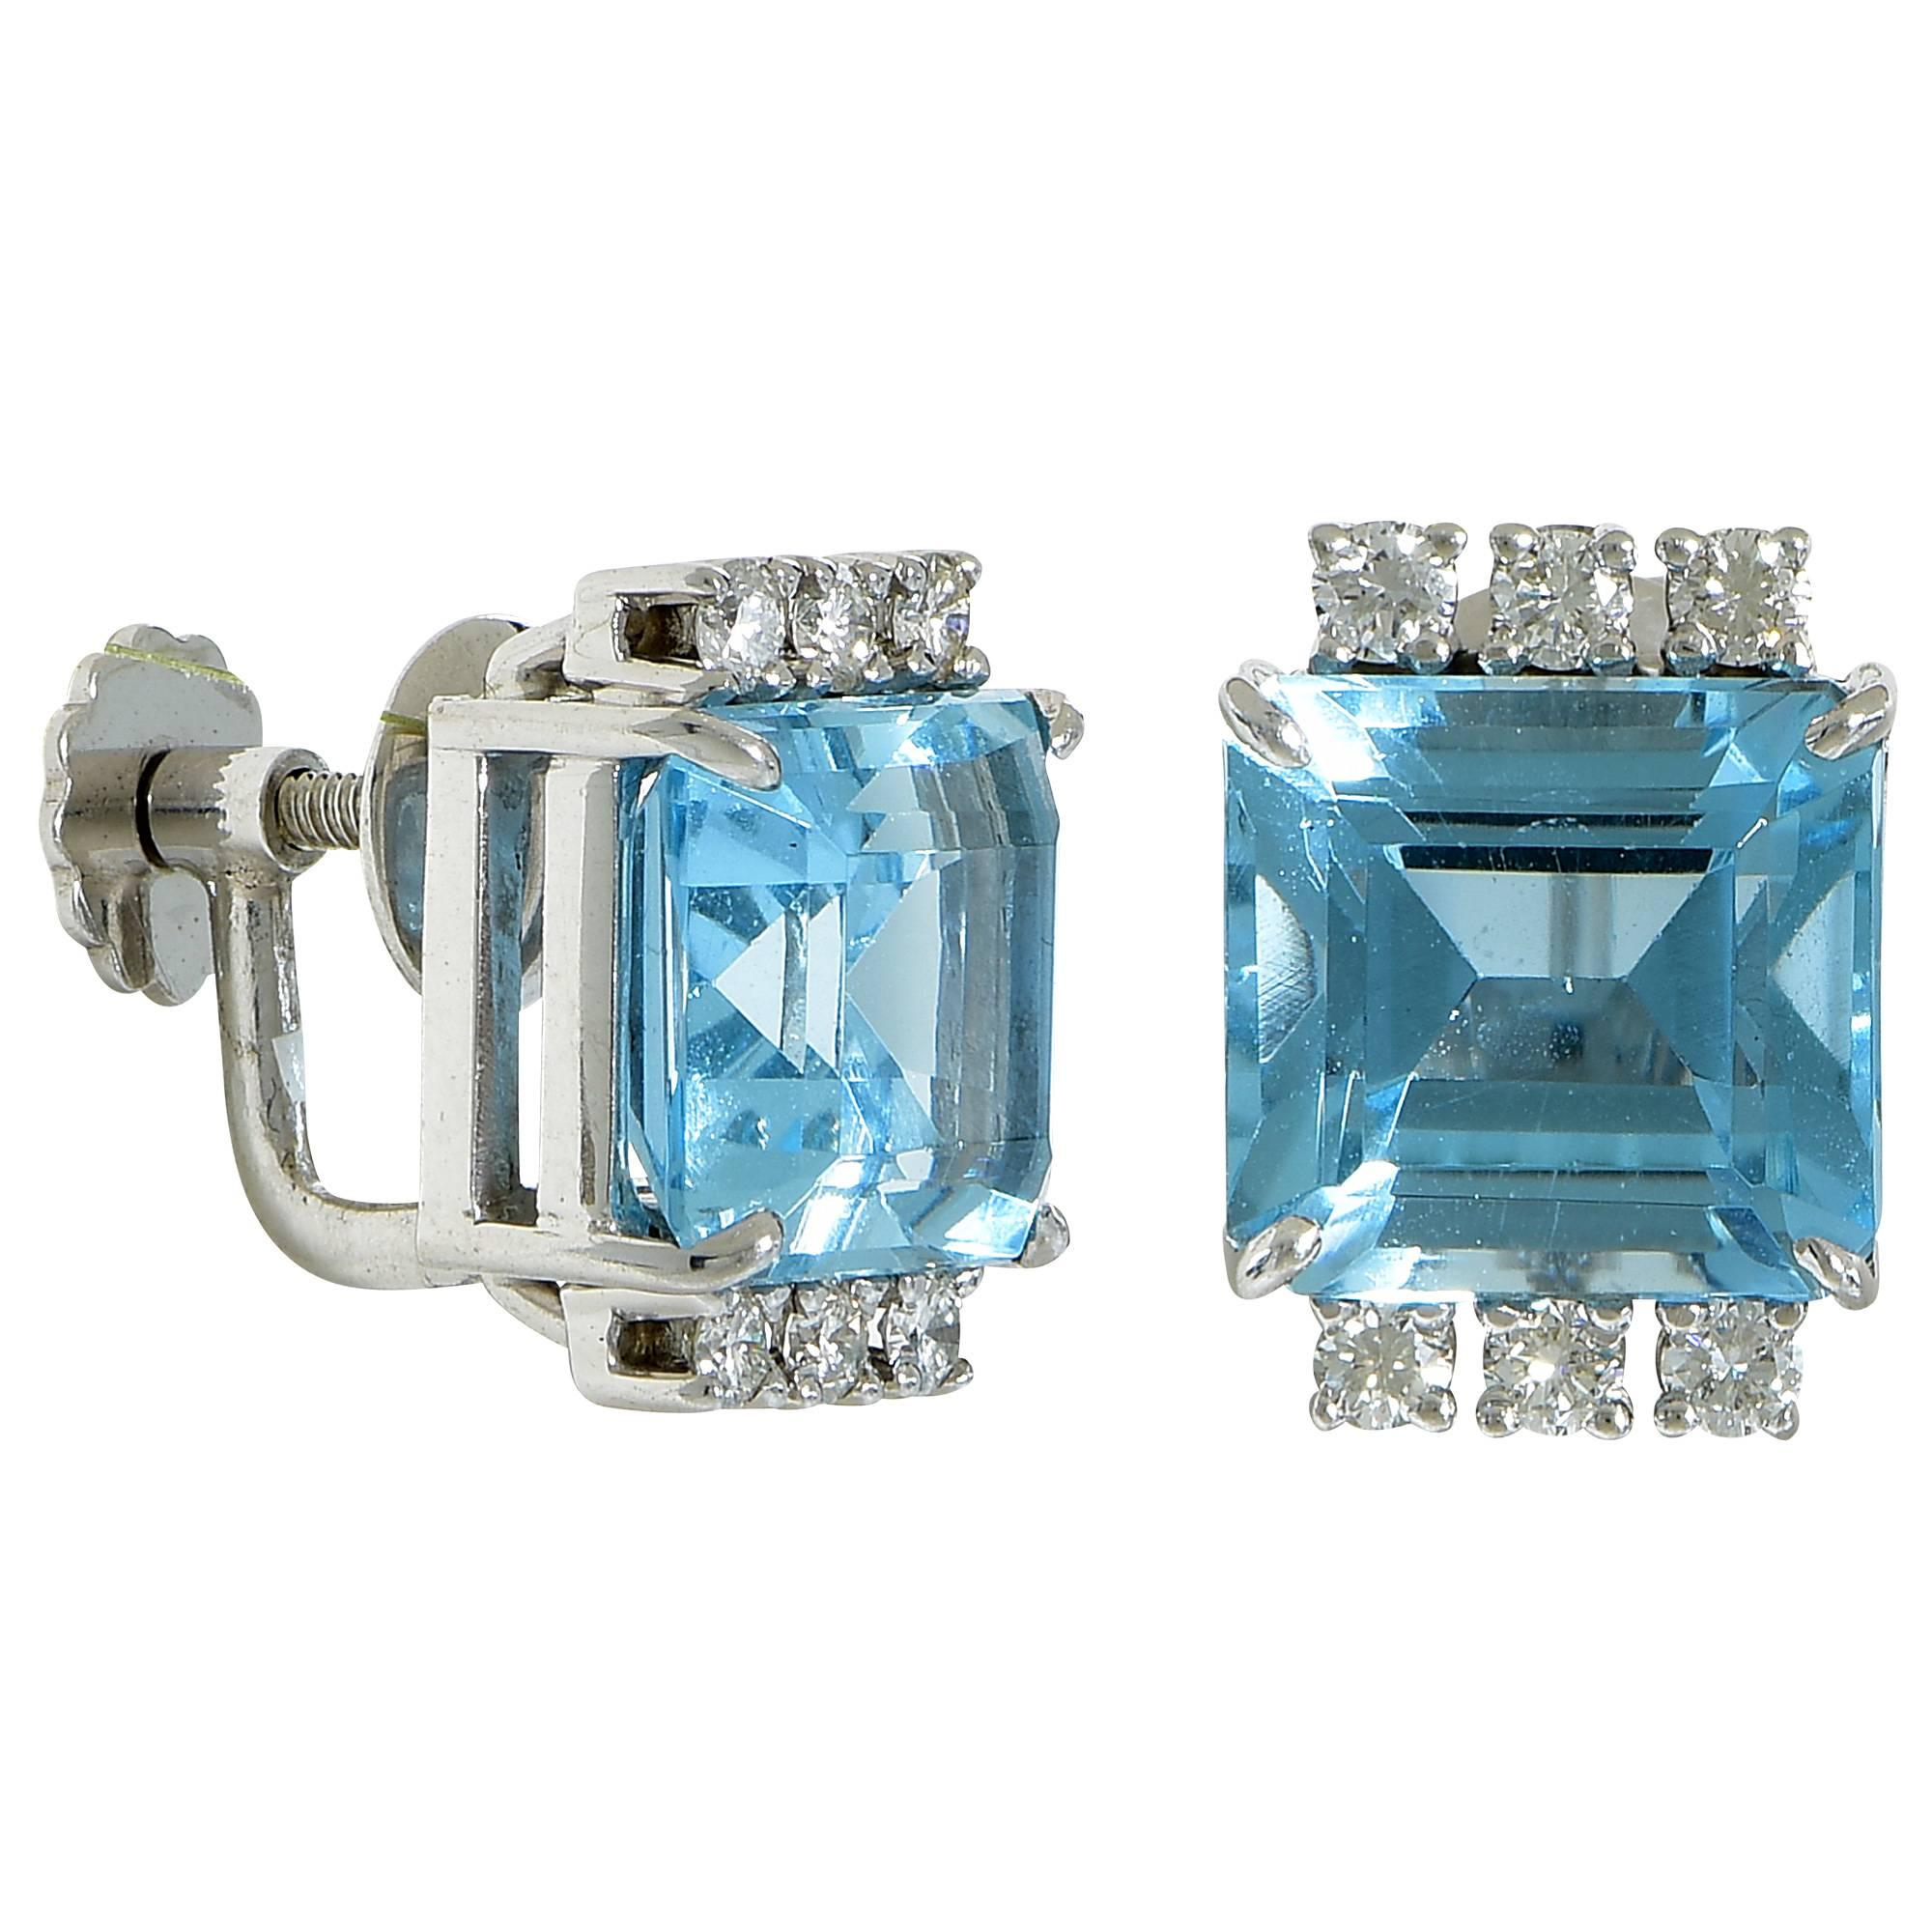 White Gold Earrings Featuring 2 Aquamarines Weighing Approximately 9.00 Carats Accented by .25 Carats of Round Brilliant Cut Diamonds, G Color, VS Clarity.

Measuring: Length 1/2 inch x Width 7/16 inch x Depth 5/16 inch
Weight: 6.37 grams

This